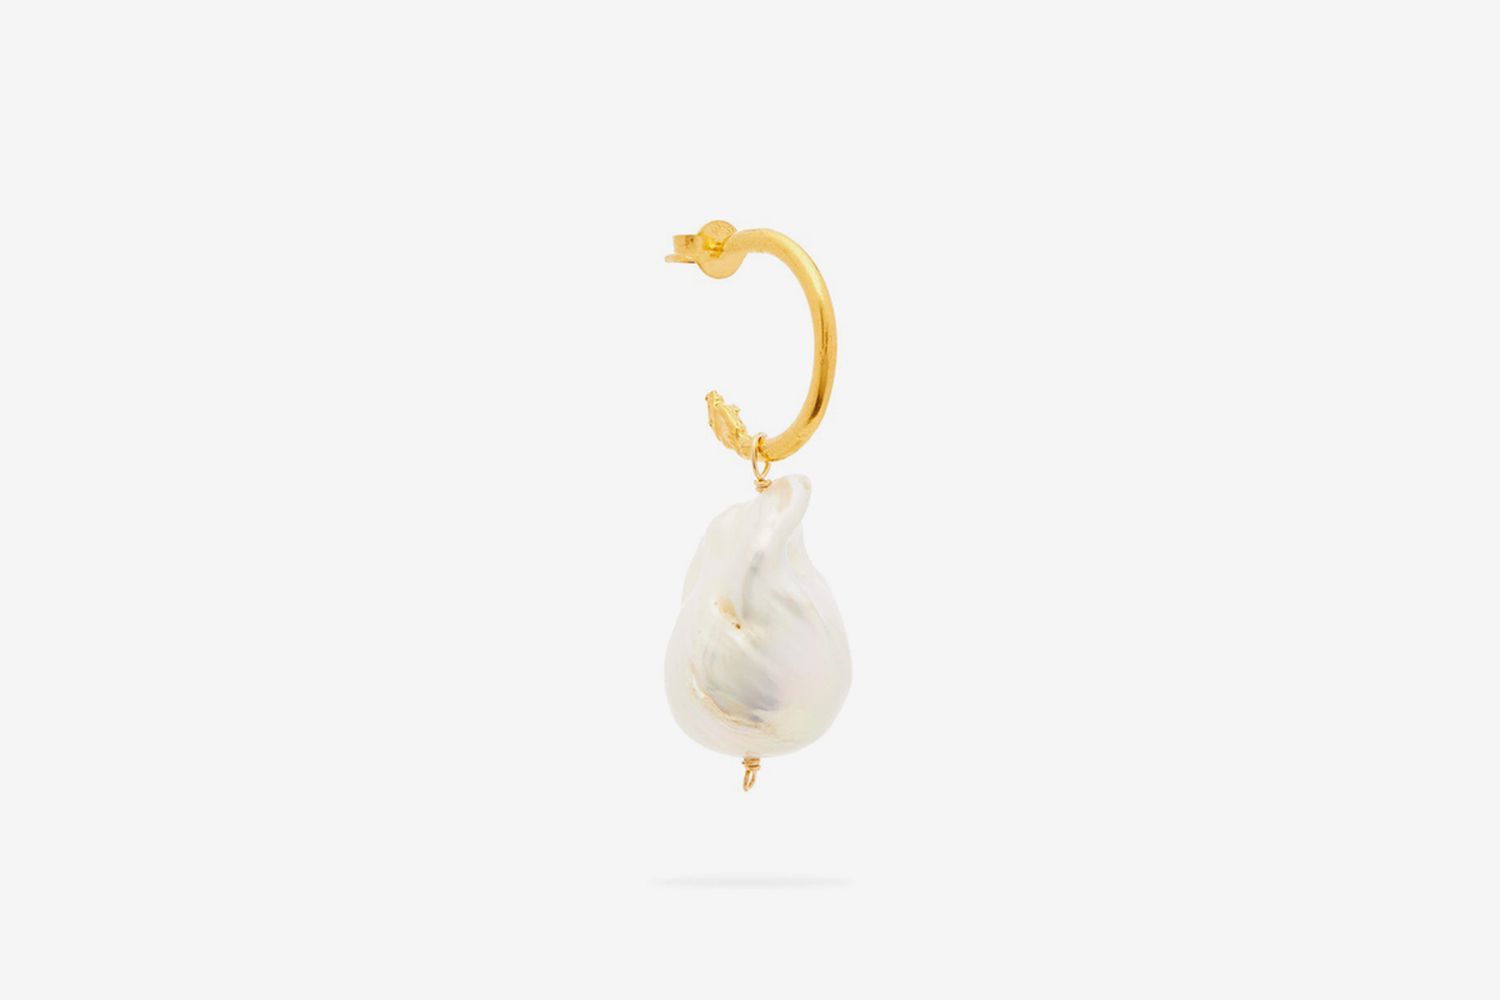 The Lion and the Baroque pearl single earring